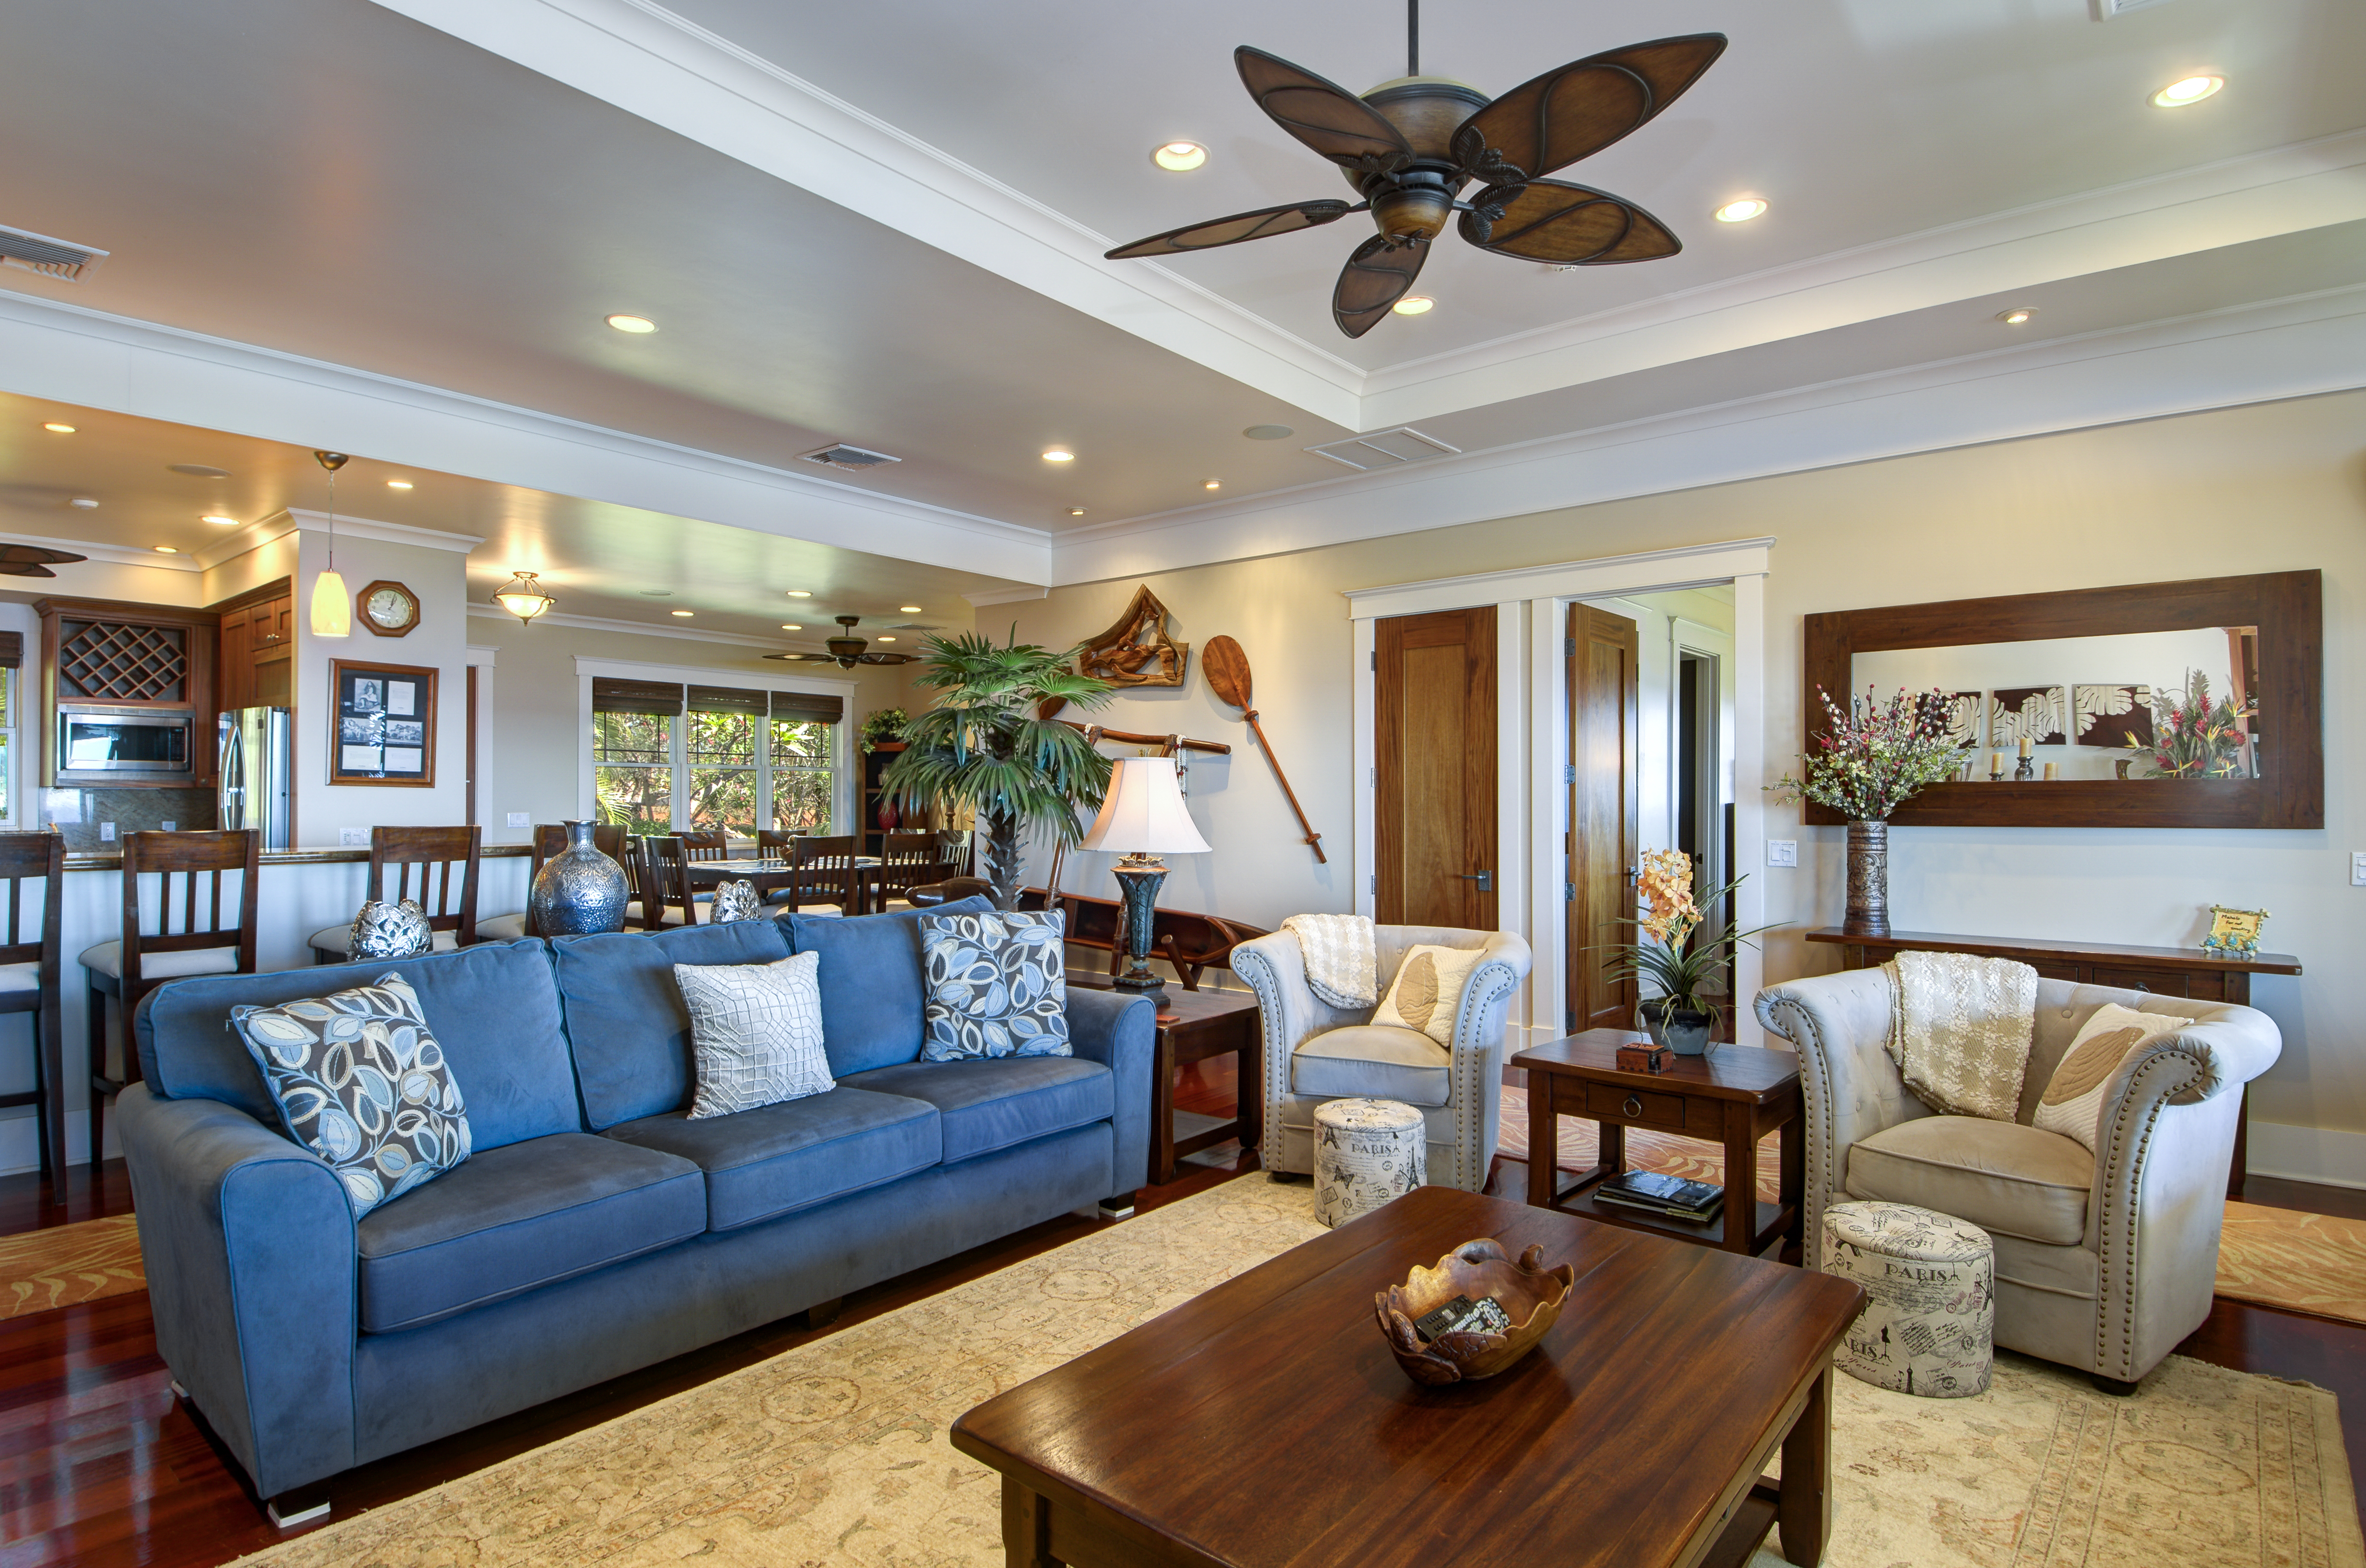 Honu La'e Living Room has plenty of couch and chair seating for everyone.